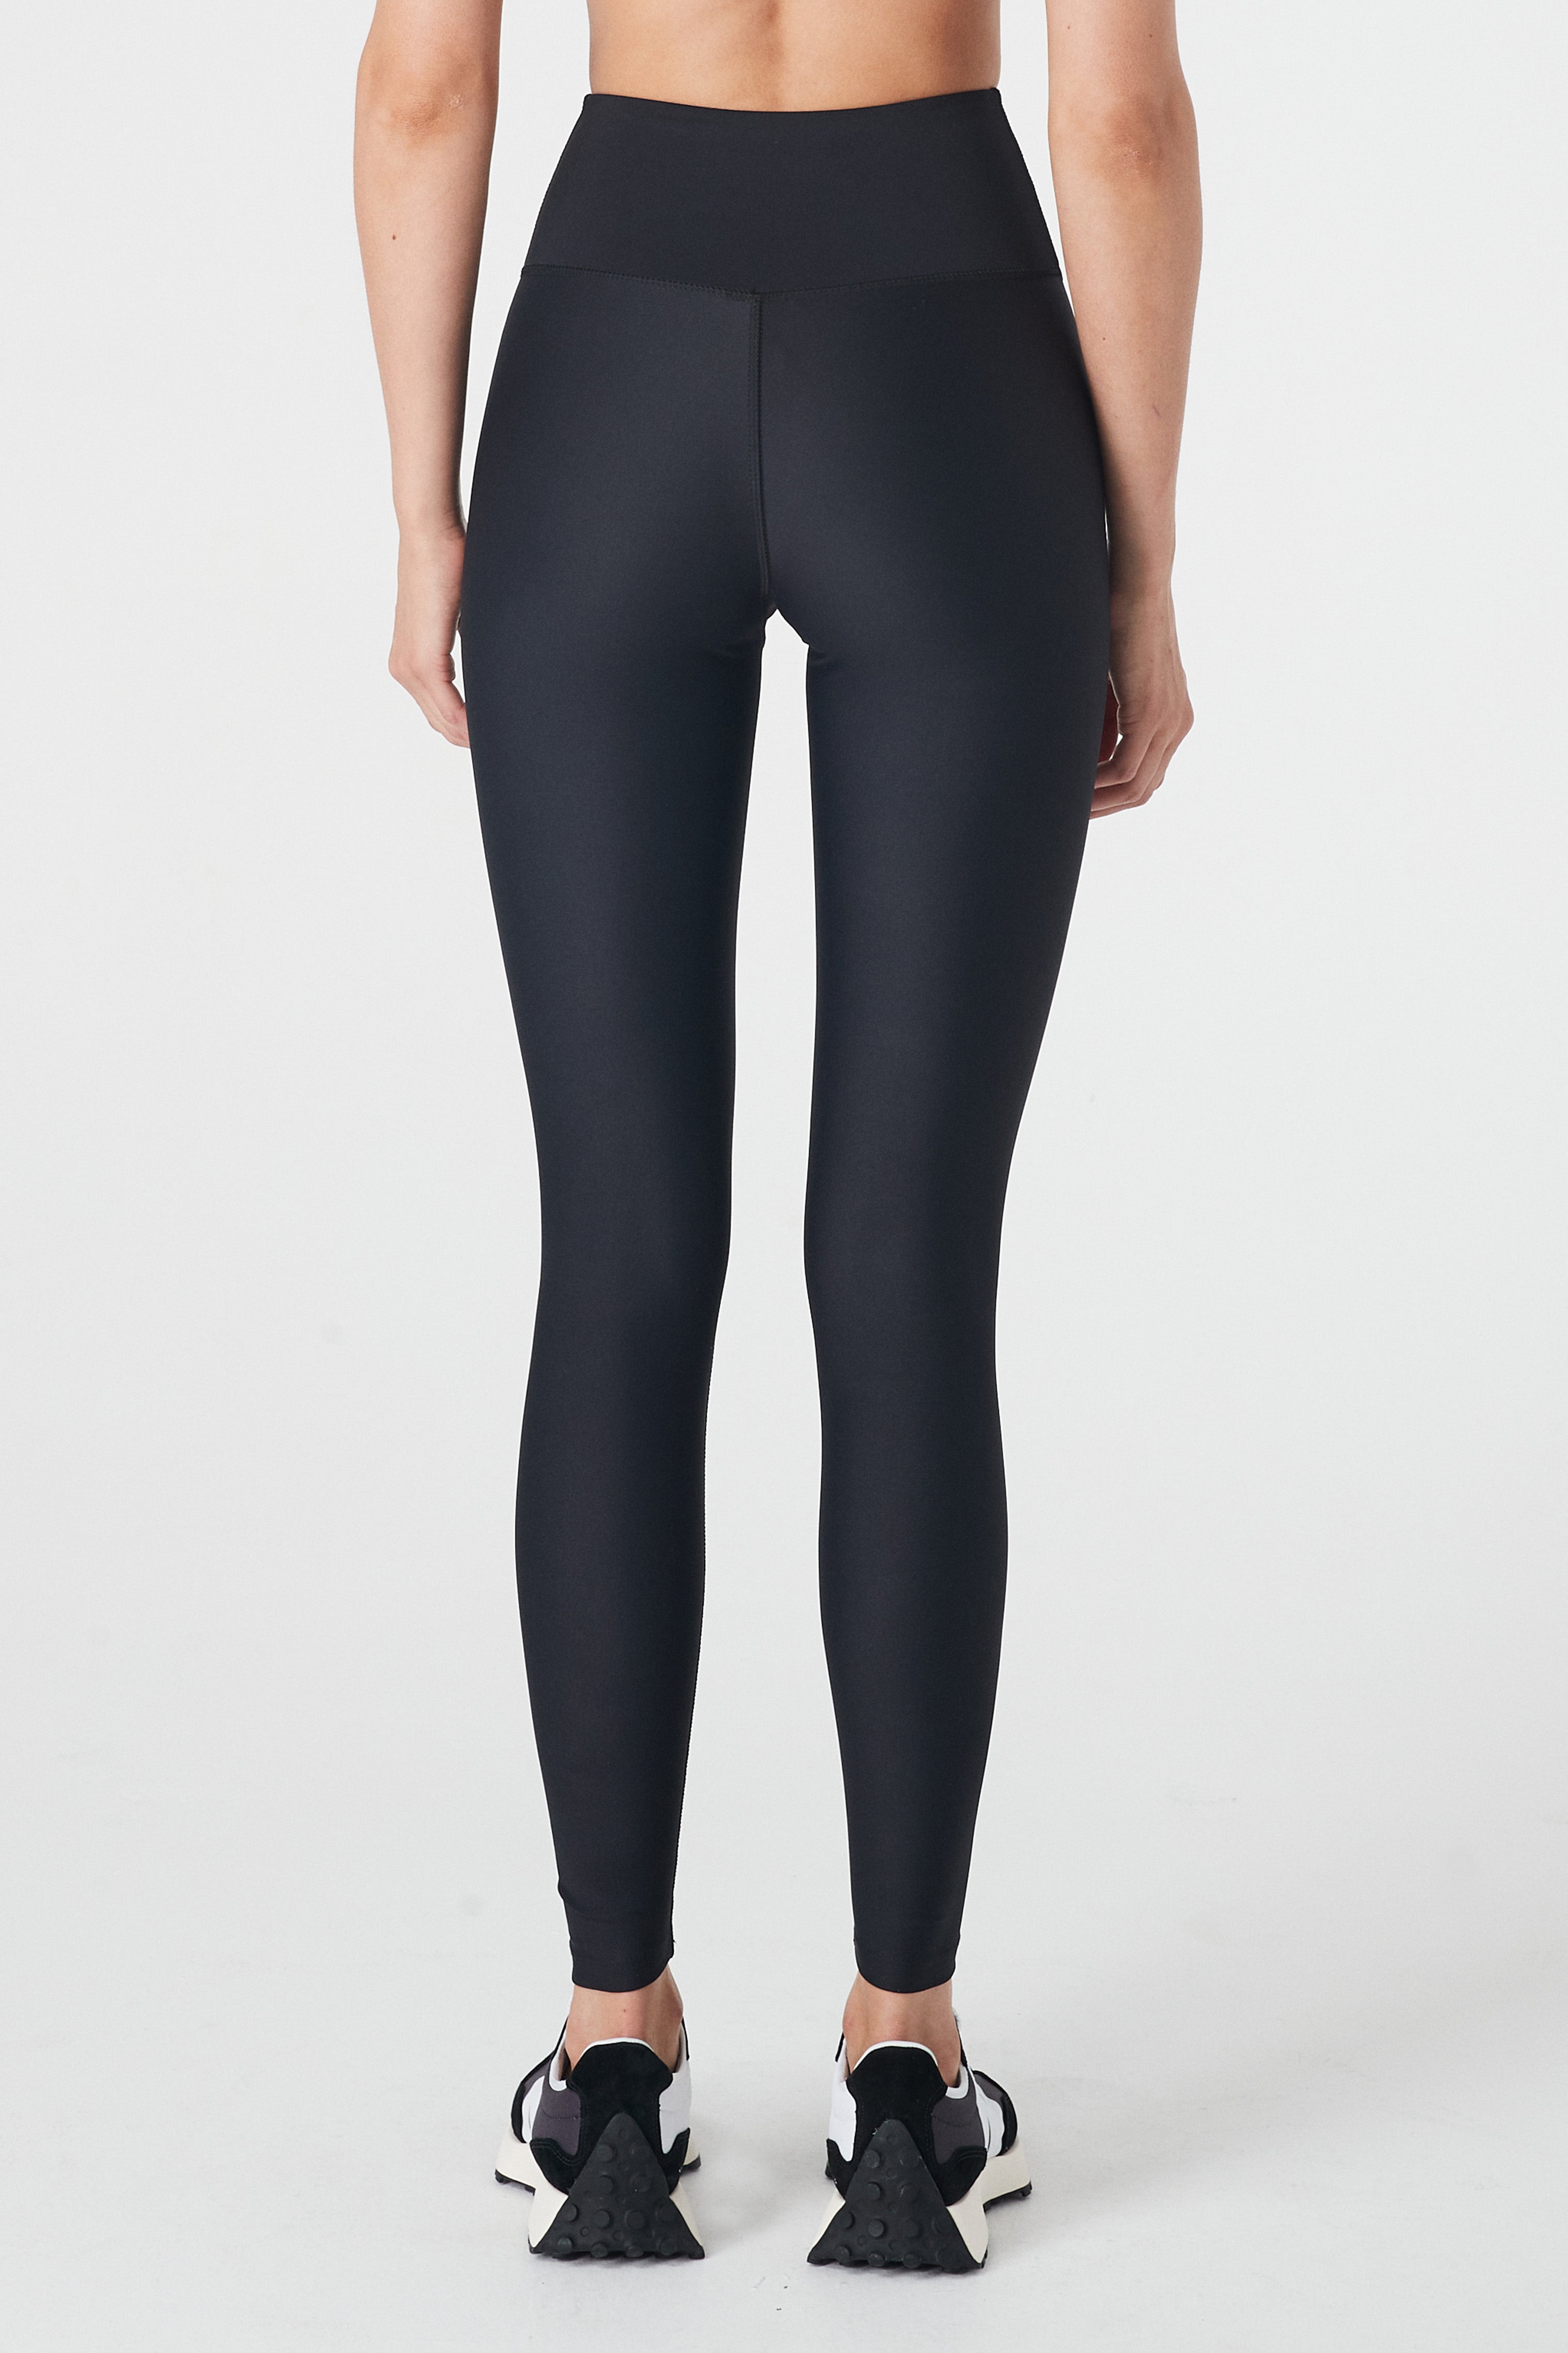 JupiterGear  Low-Waisted Ribbed Leggings with Hidden Pocket